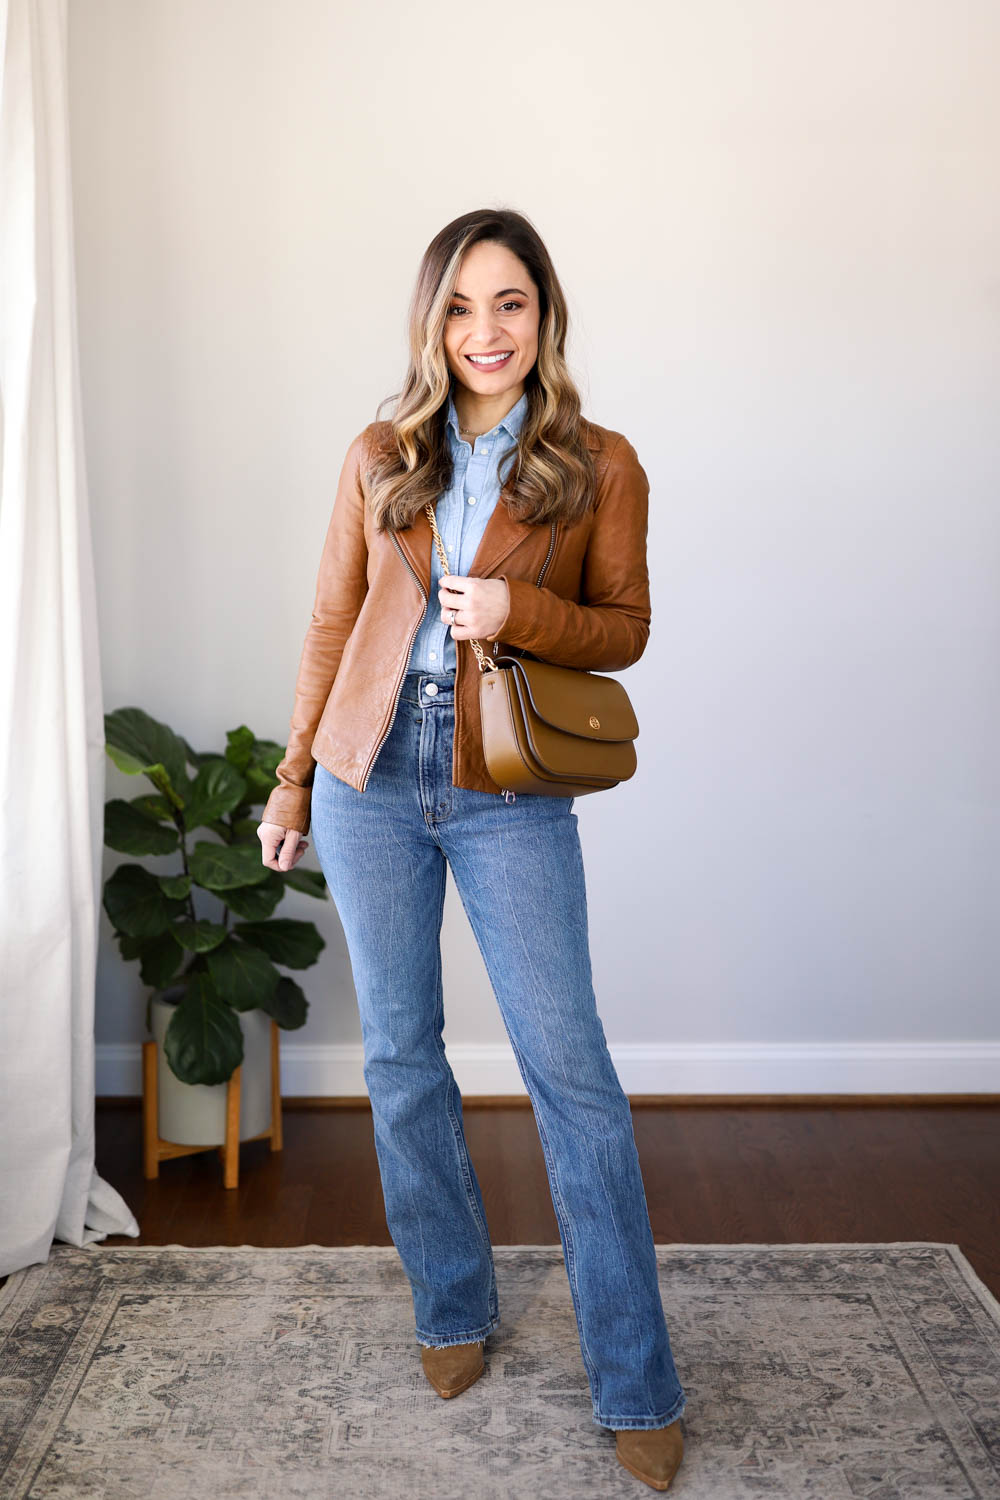 HOW TO DRESS UP YOUR JEANS  6 DIFFERENT STYLES OF JEANS AND HOW